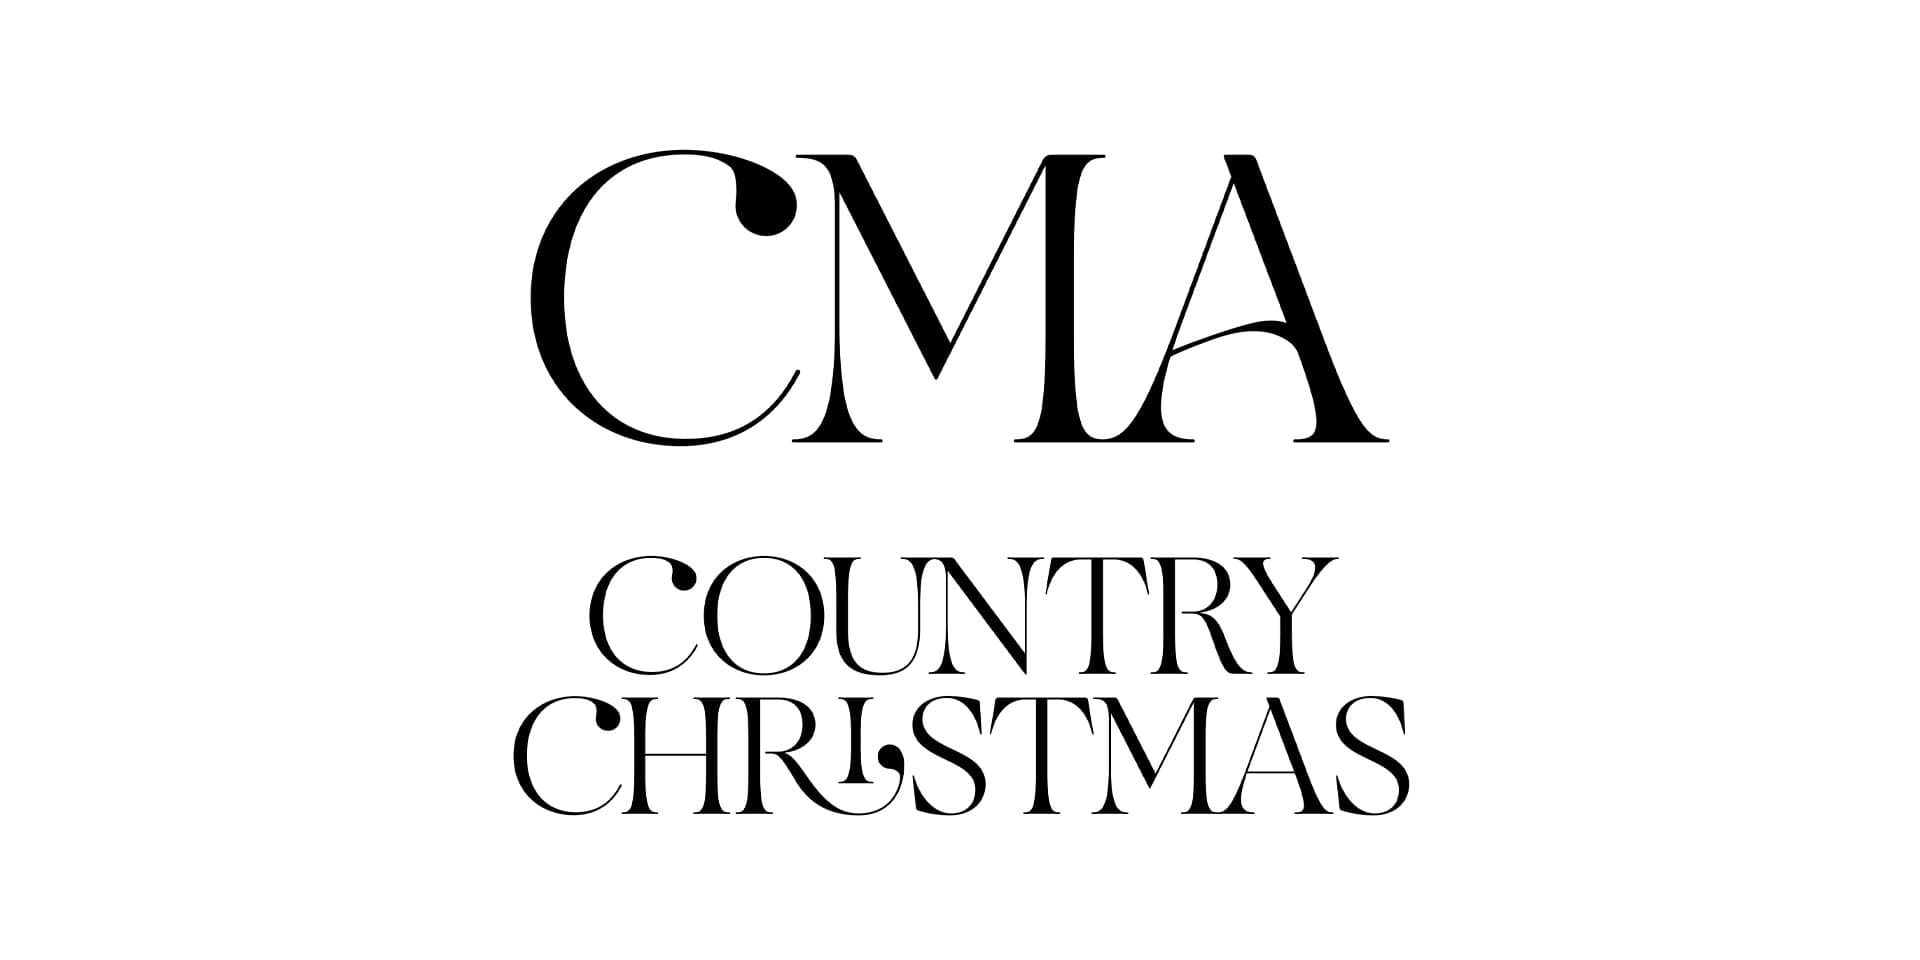 Amy Grant performs &quot;My Grown Up Chistmas List&quot; on the CMA County Music Christmas 2023 special